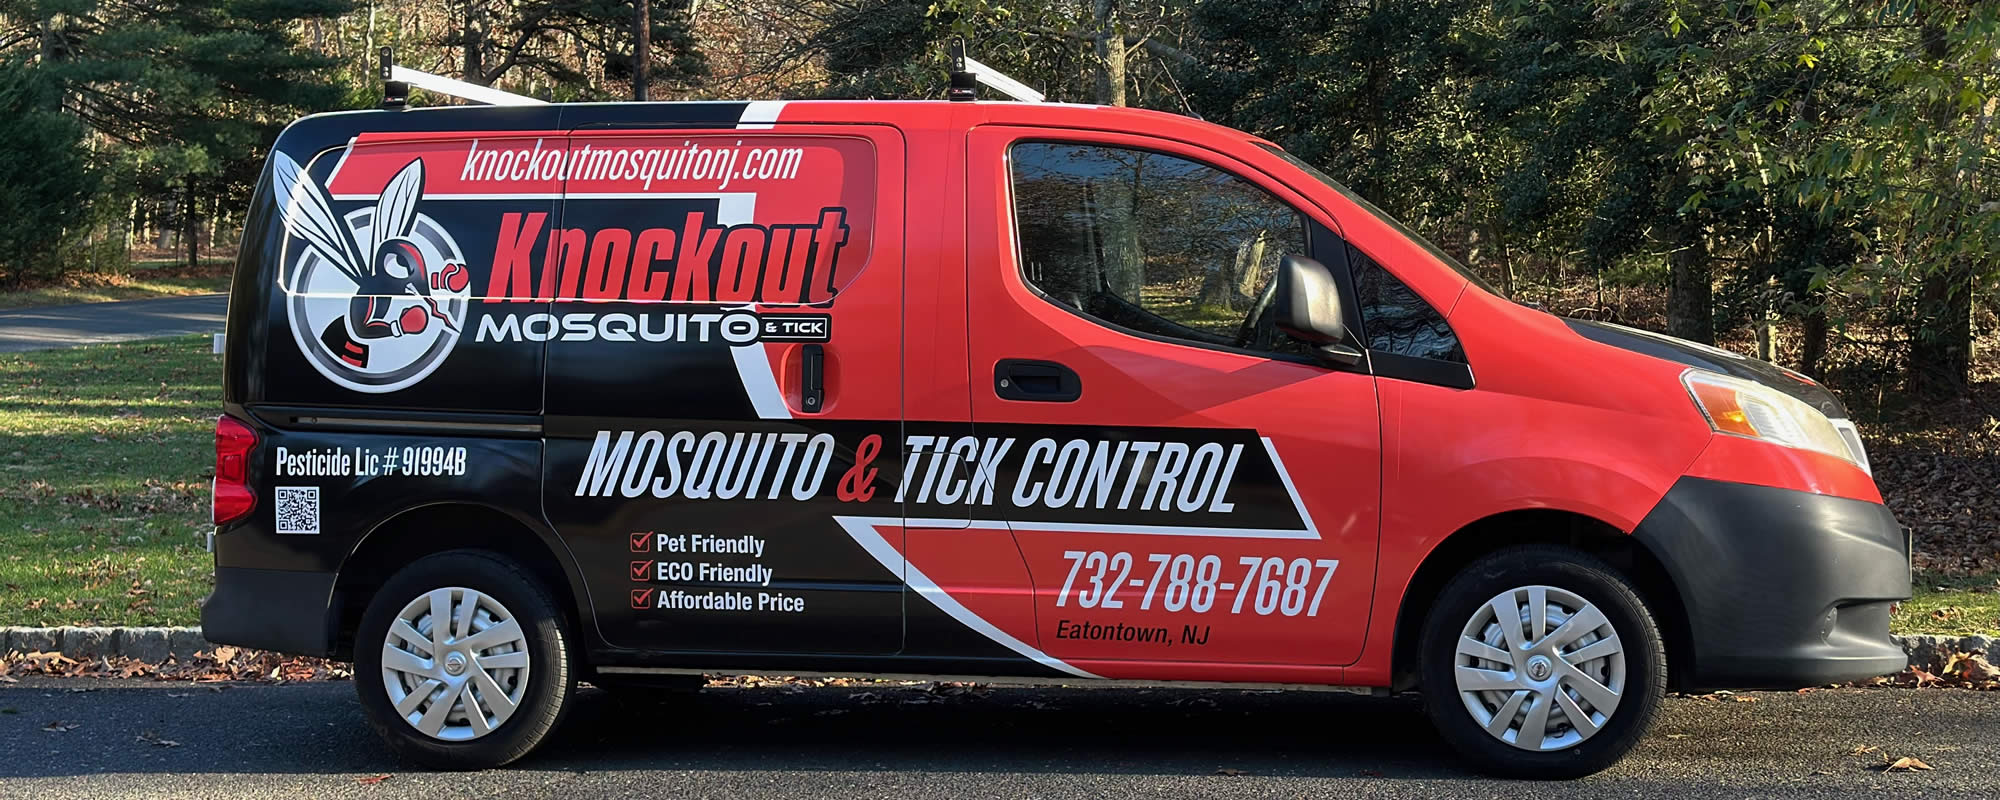 Freehold Township Mosquito Control Services